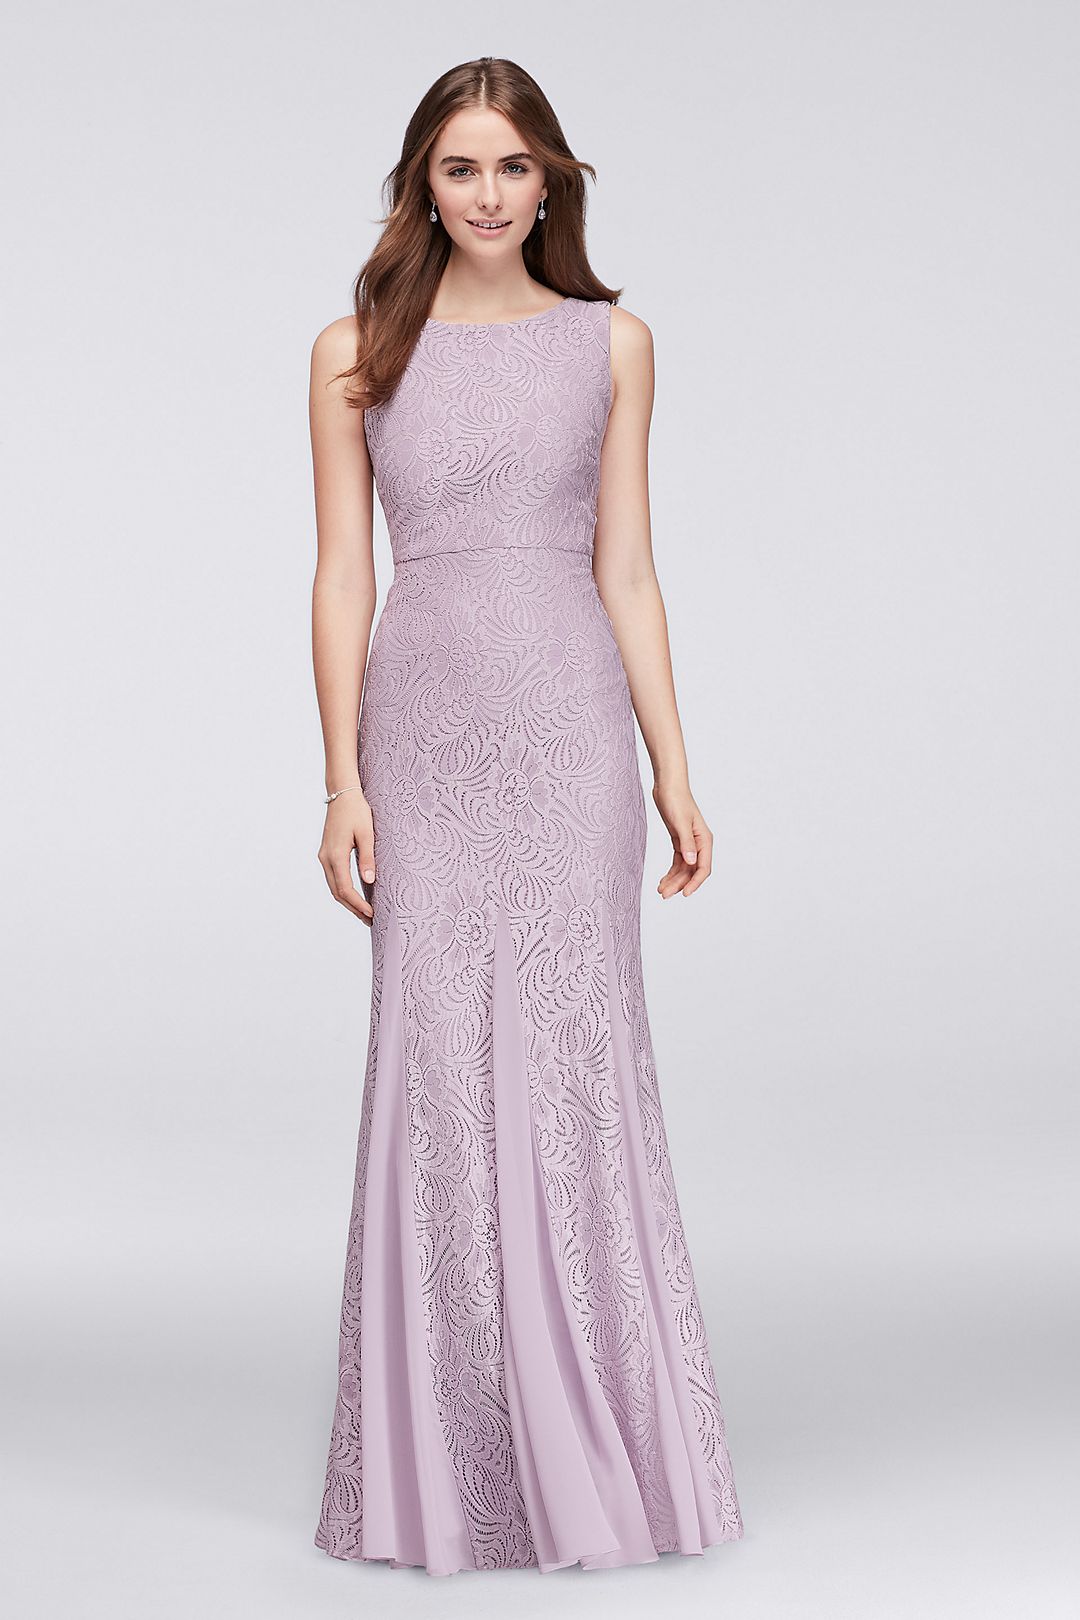 Stretch Lace Bridesmaid Dress with Godet Skirt Image 1